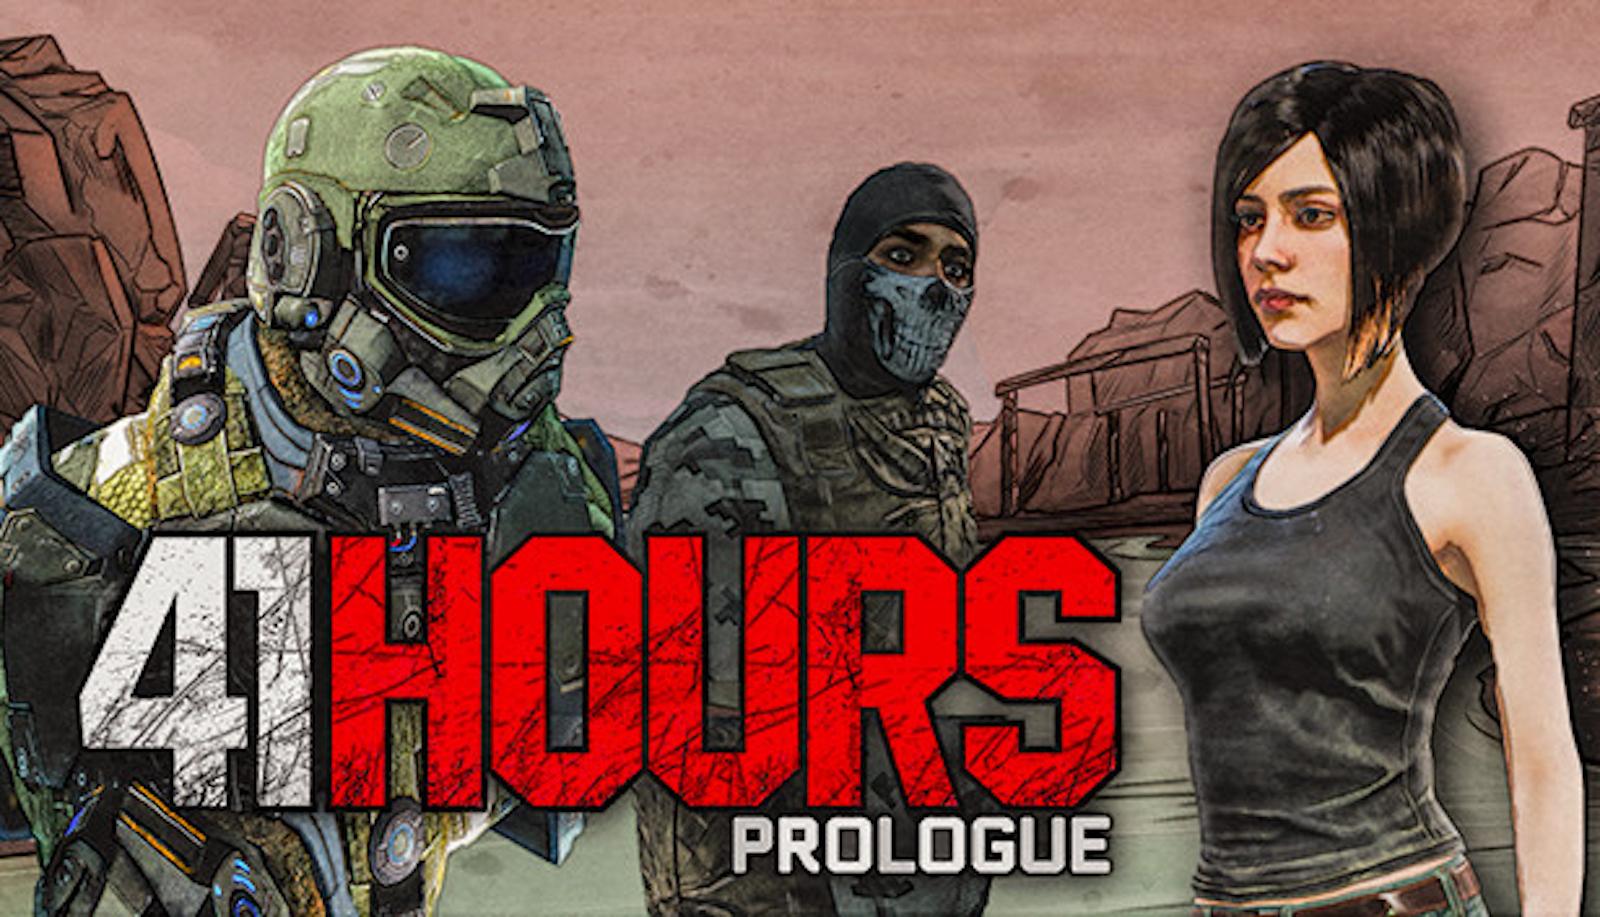 41 Hours review